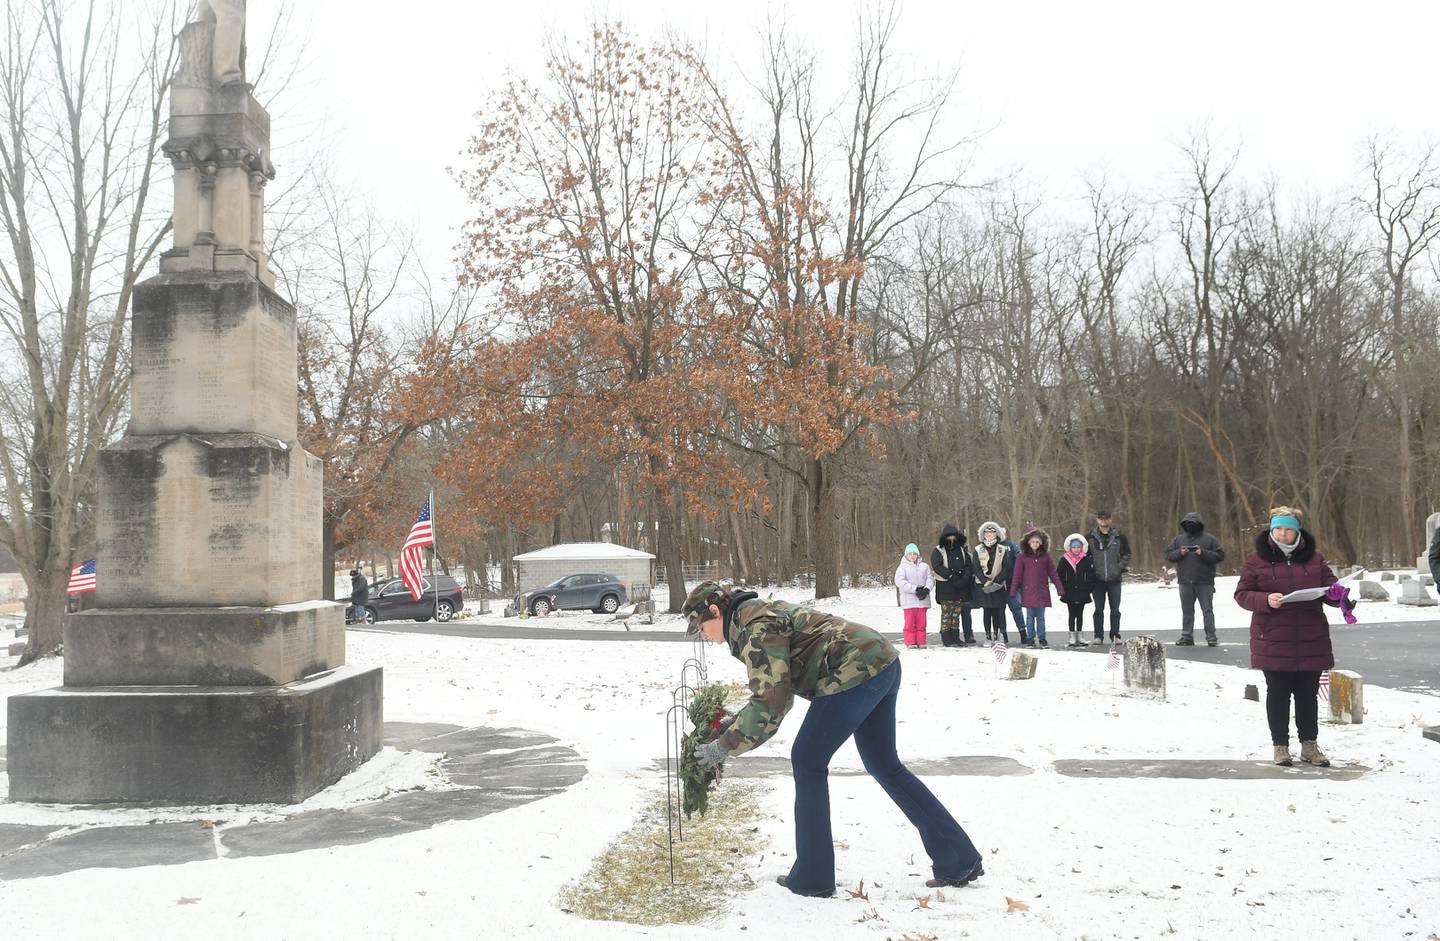 Erin Dietrich of Oregon, an Army veteran, lays a wreath in honor of Army veterans, at Daysville Cemetery on Dec. 17 during the Wreaths Across America project. Wreaths were then placed on veterans' graves by other volunteers and veterans.